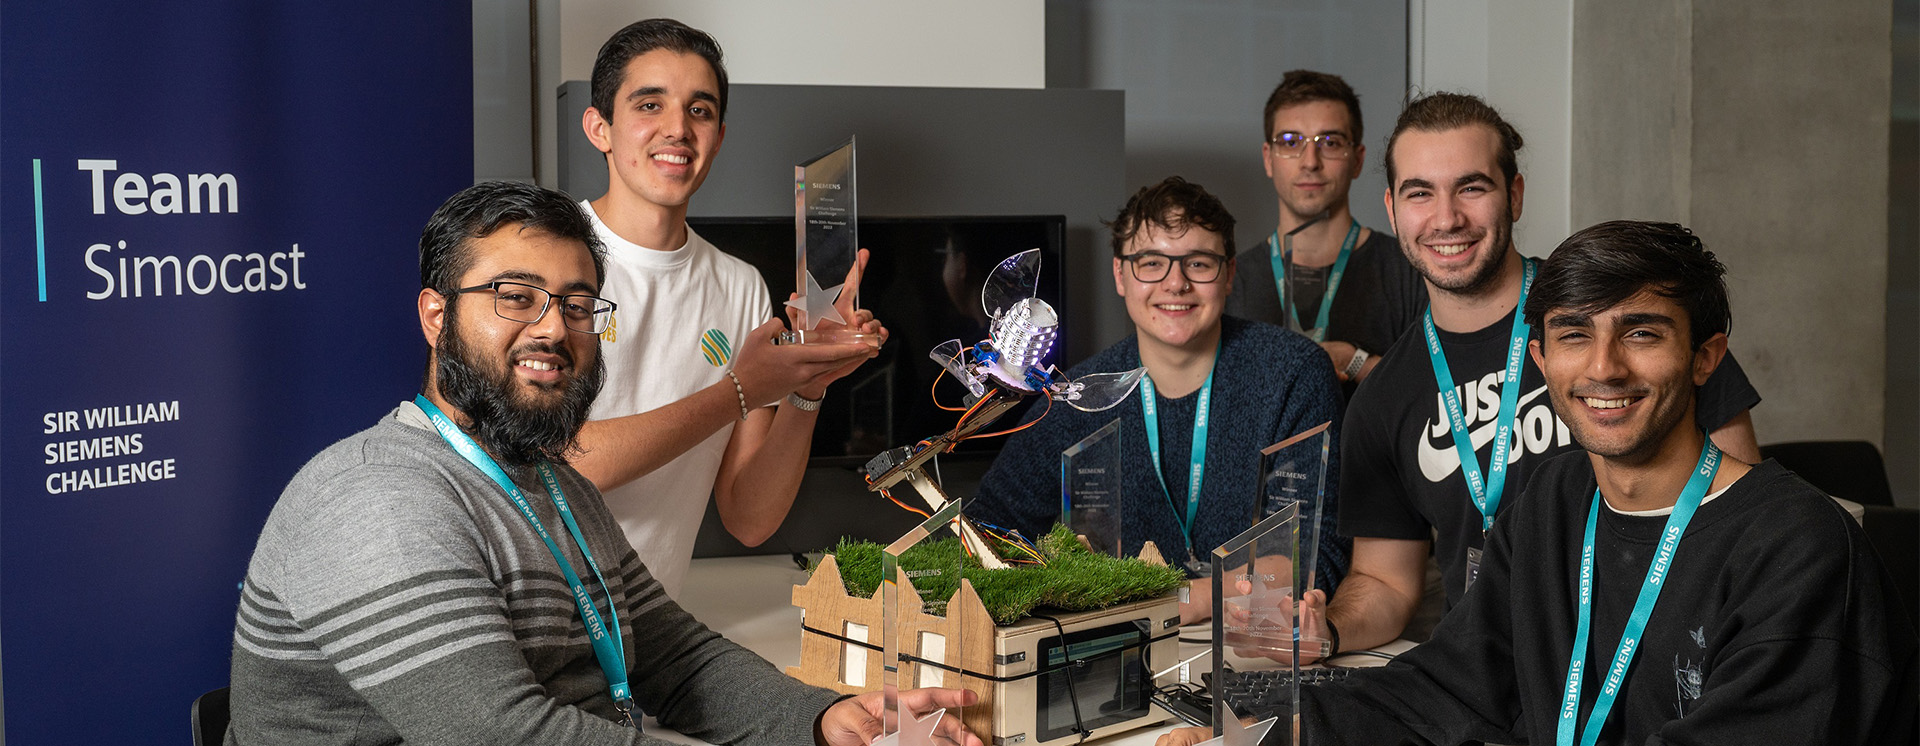 Group of University of Birmingham Engineering students holding their hackathon prize trophy